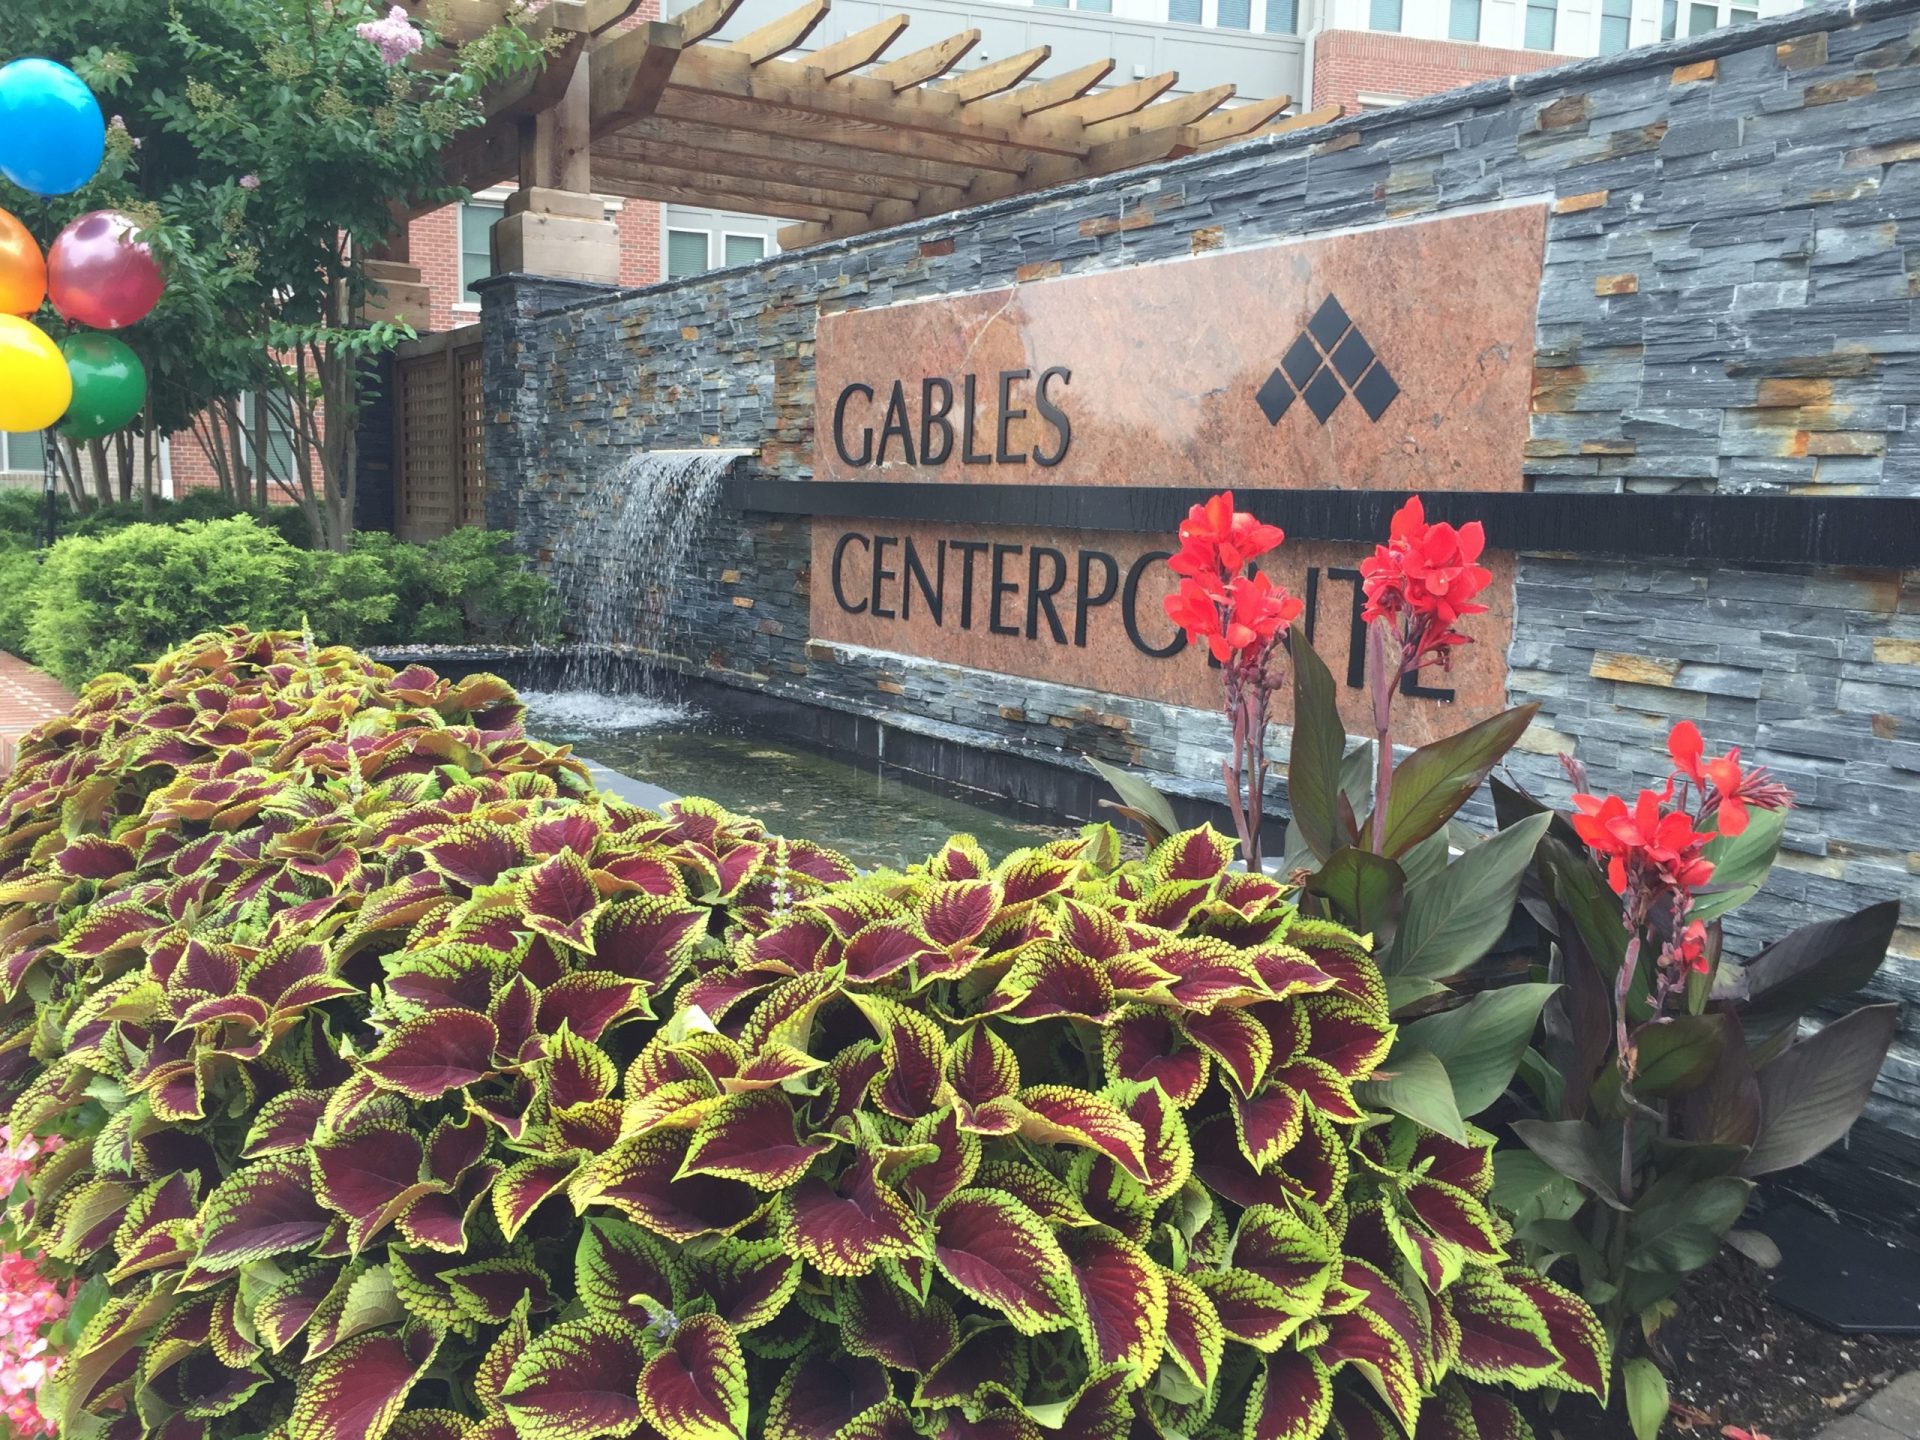 Gables Centerpointe Sign and Fountain